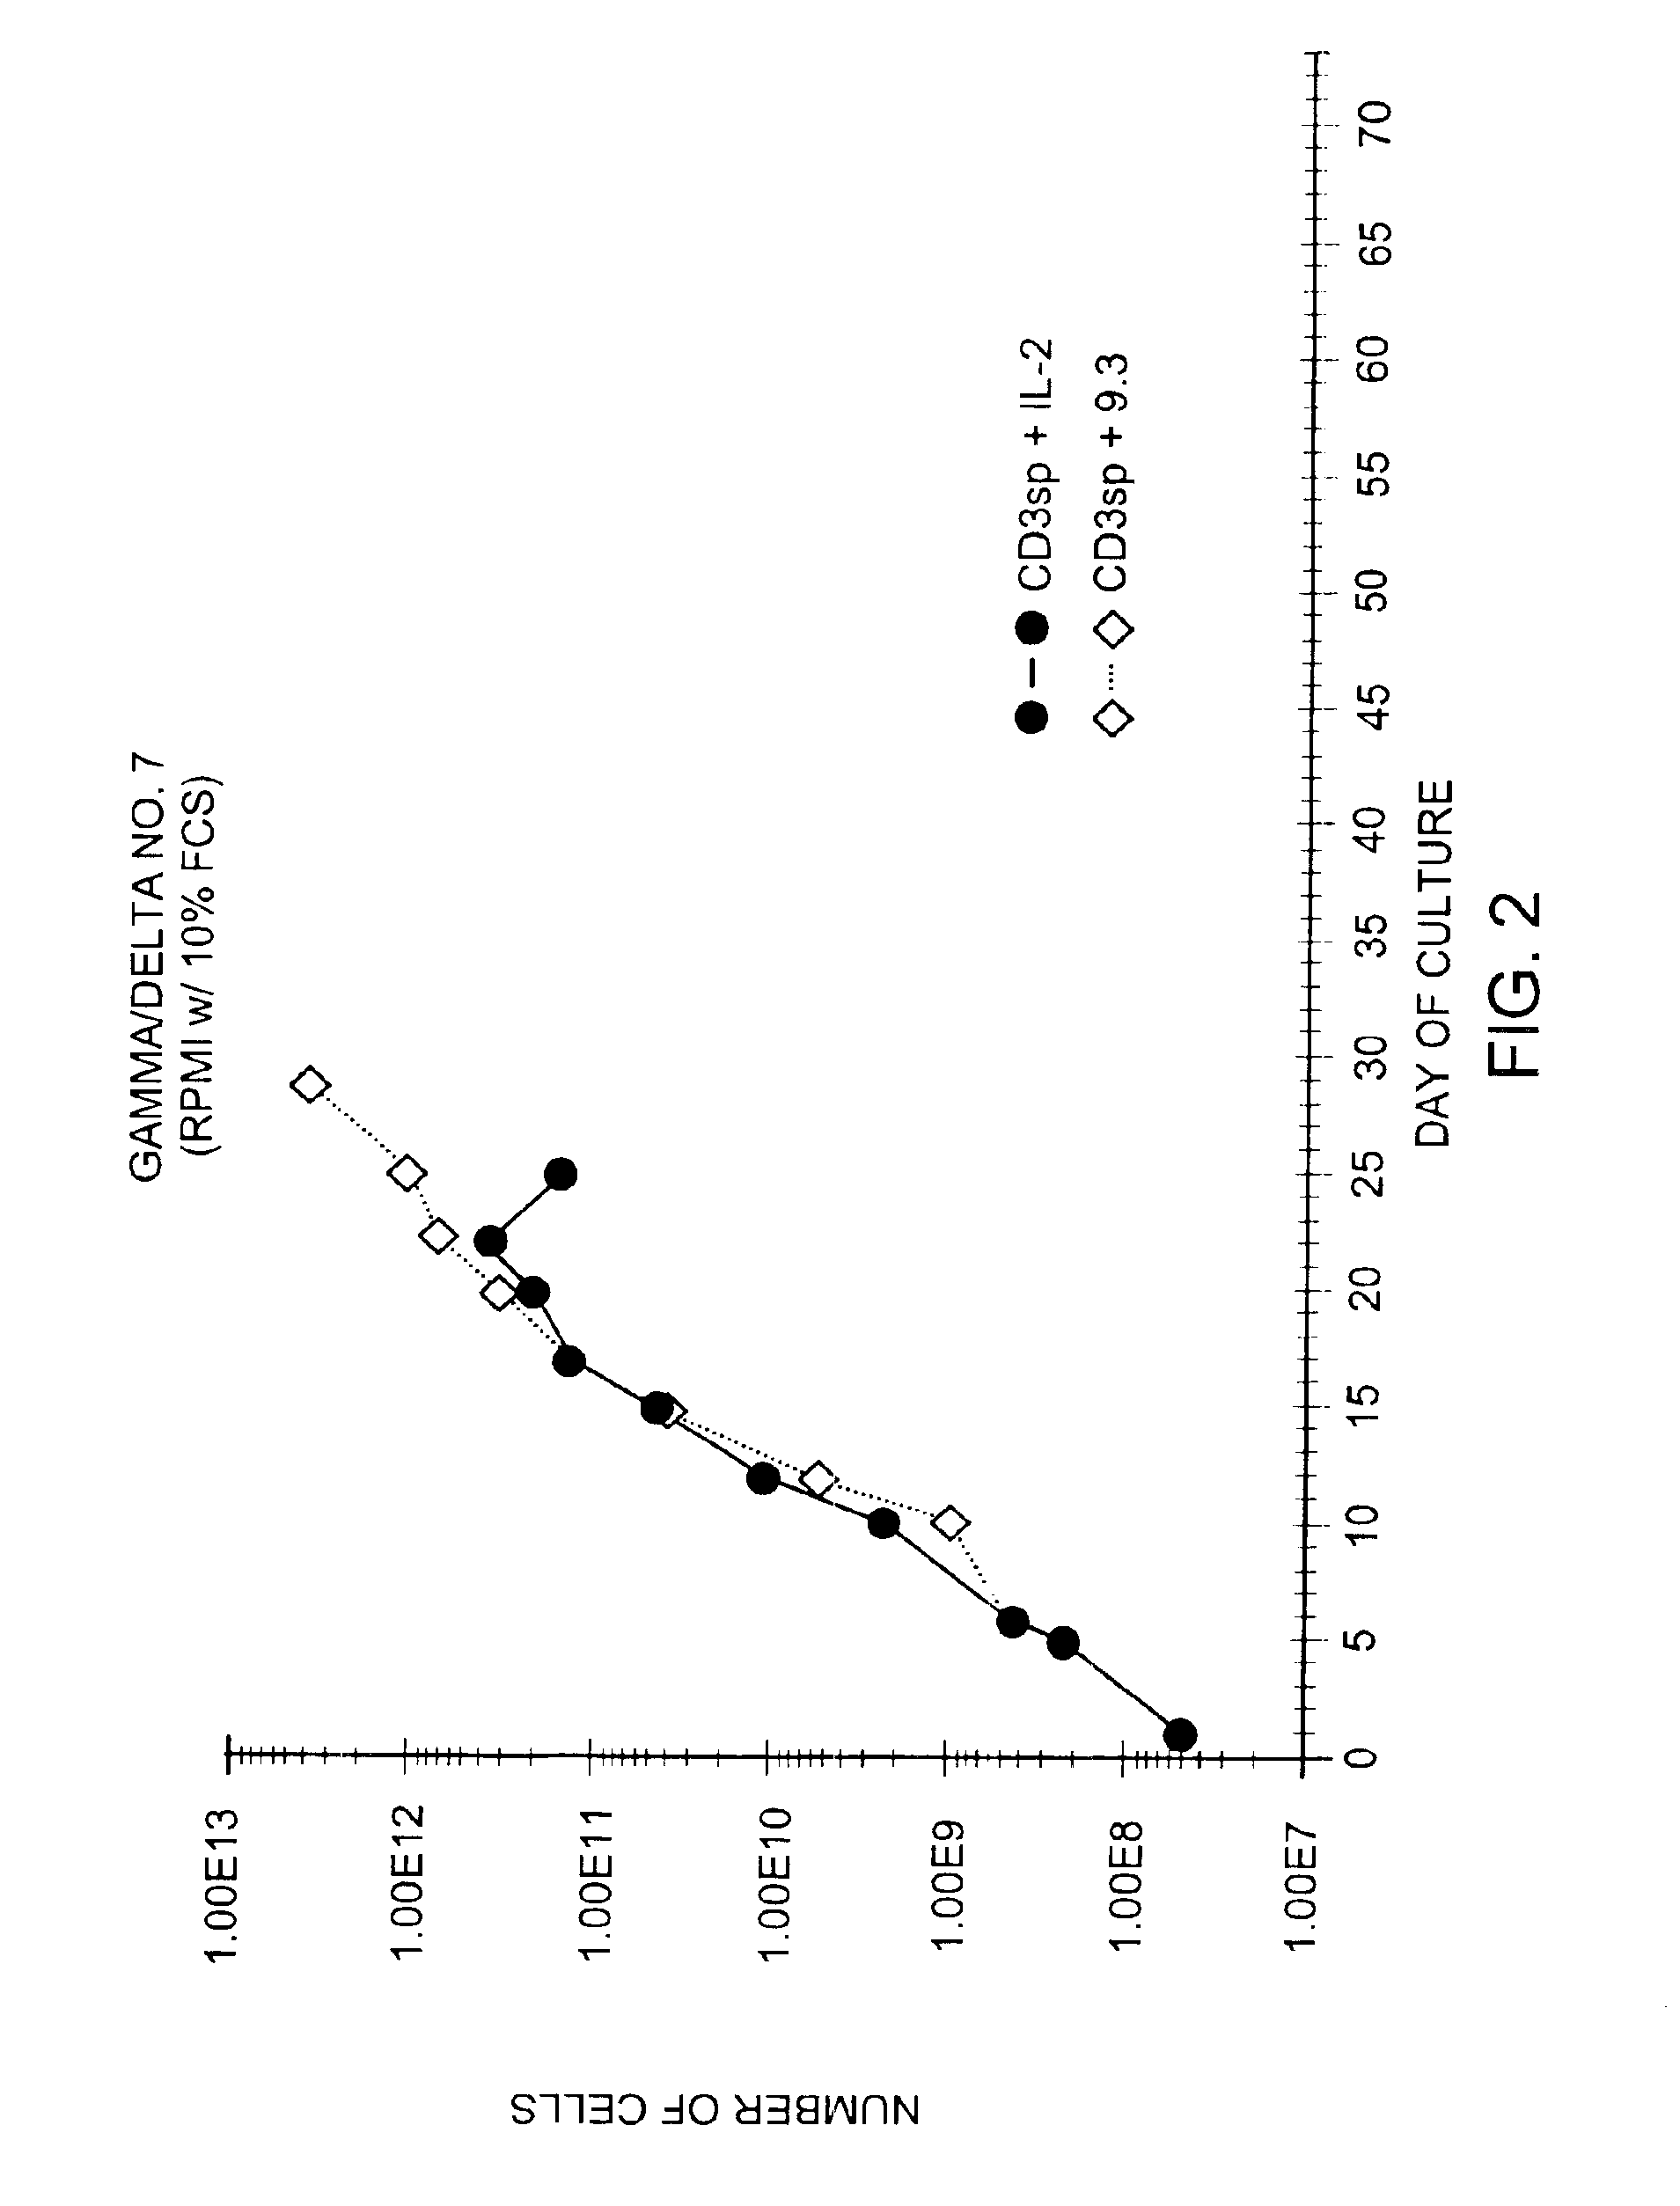 Methods for selectively stimulating proliferation of T cells